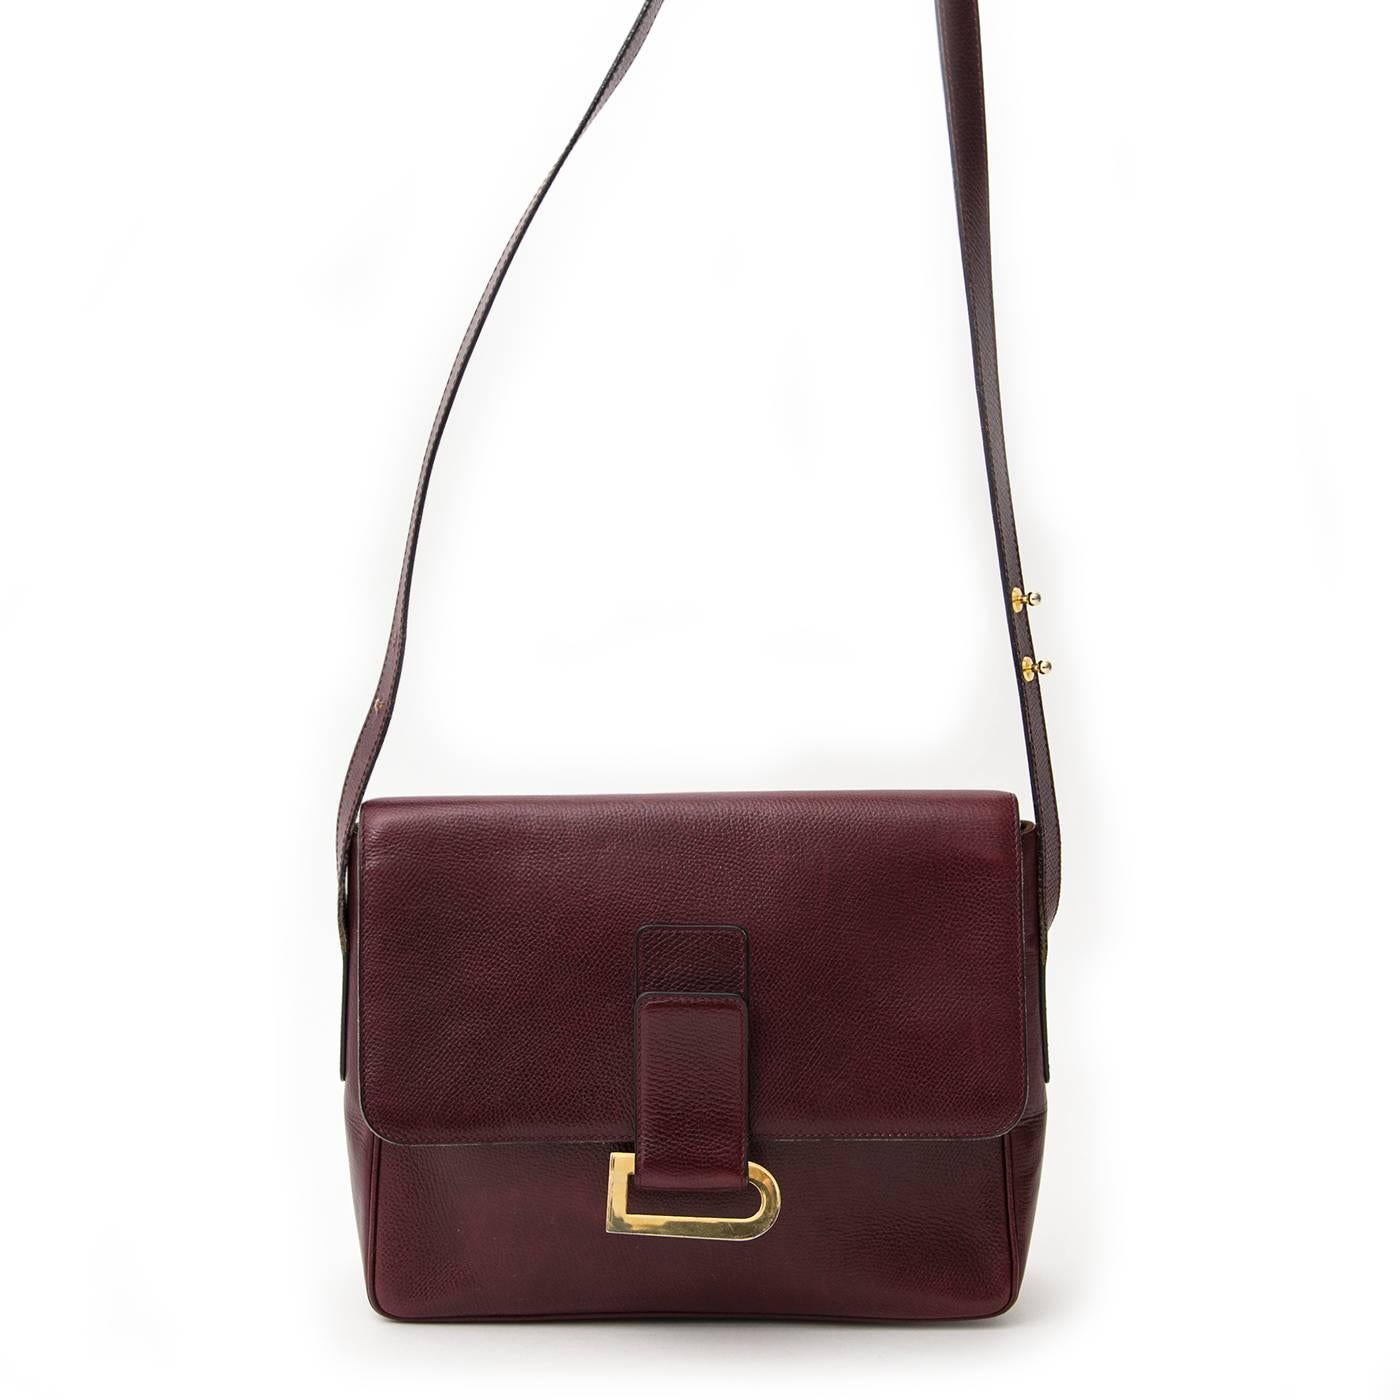 This classic Delvaux comes in an elegant burgundy colored leather and features a golden D closure. The shoulder bag has an adjustable strap and is therefore easy to wear. The front flap closes with a magnetic press button. The interior of this